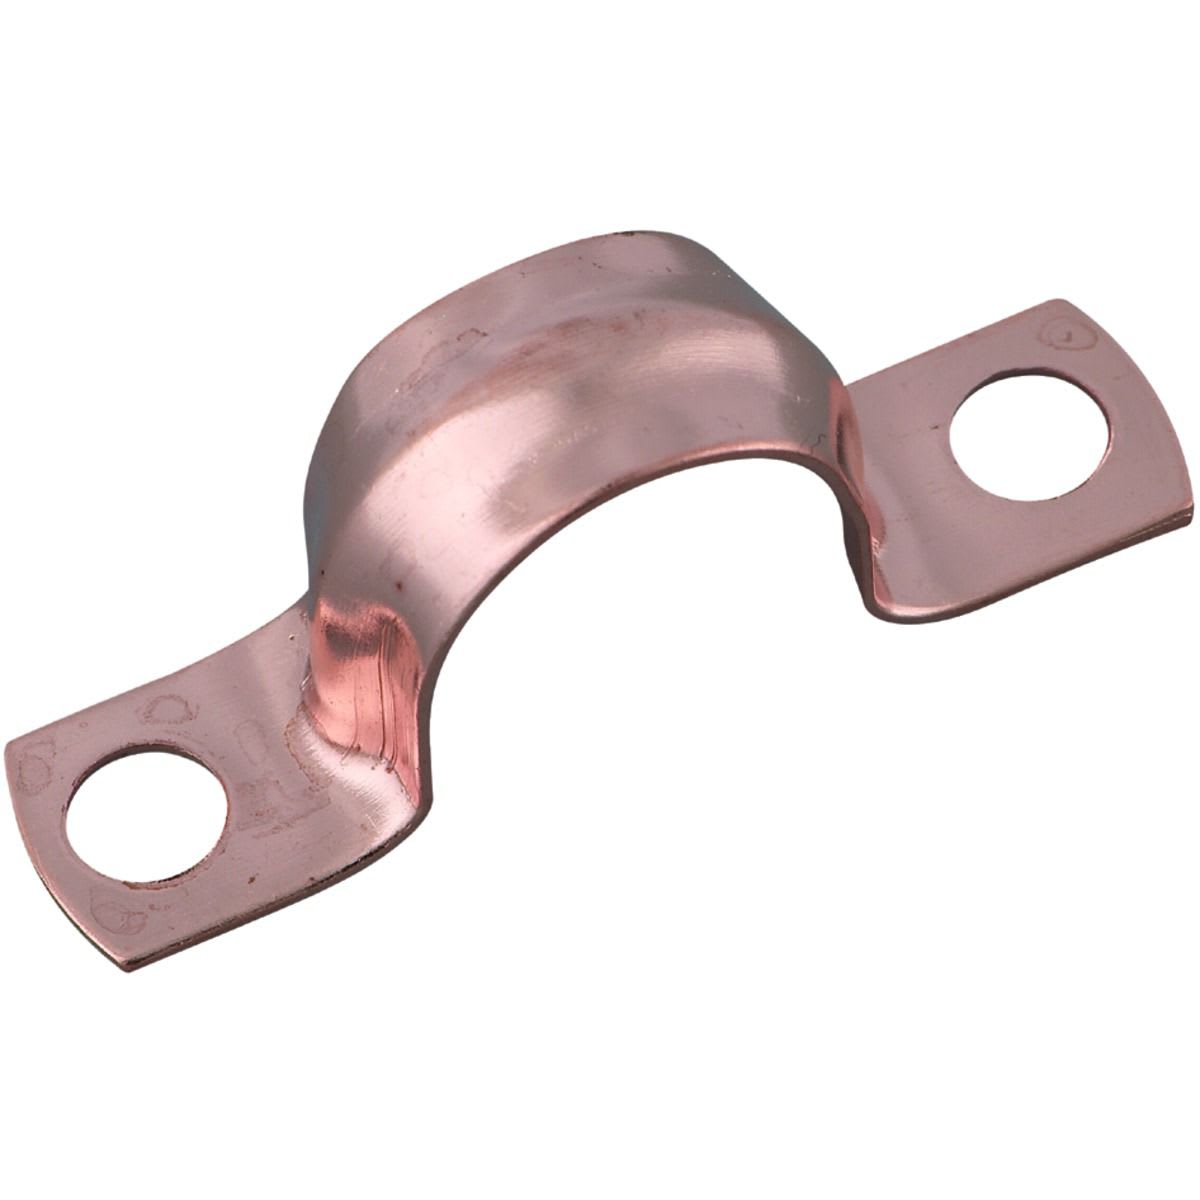 Primaflow Copper Pipe Clips - 15mm Pack Of